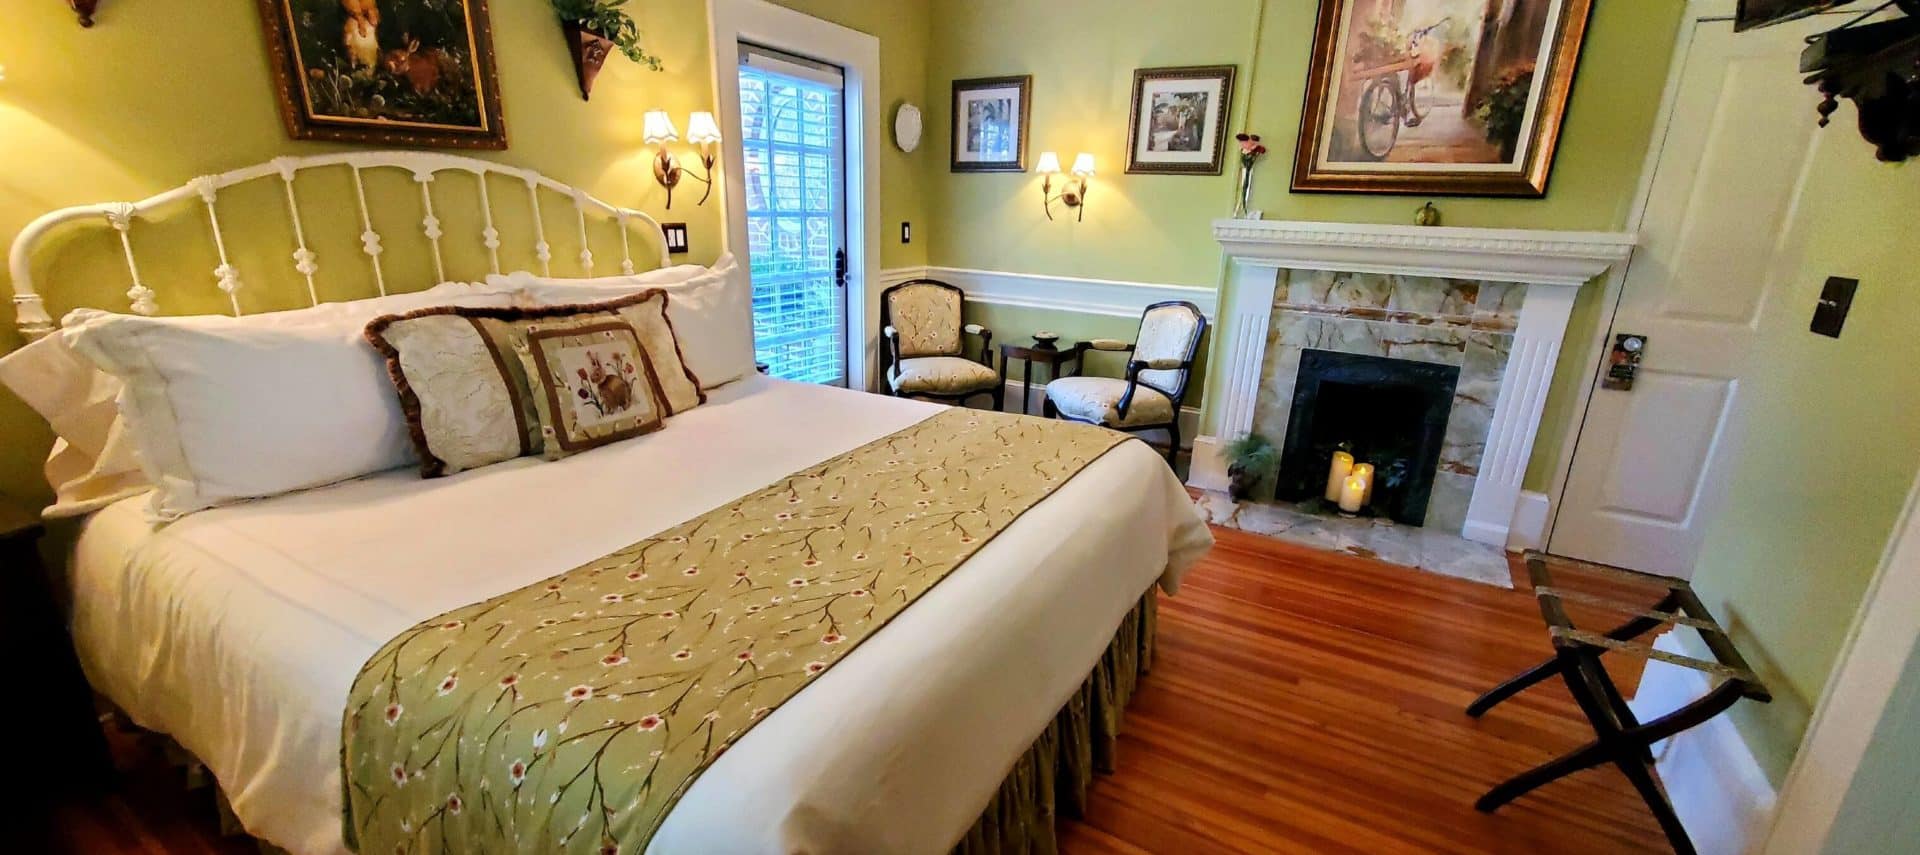 California king bed near two chairs and candle lit fireplace.